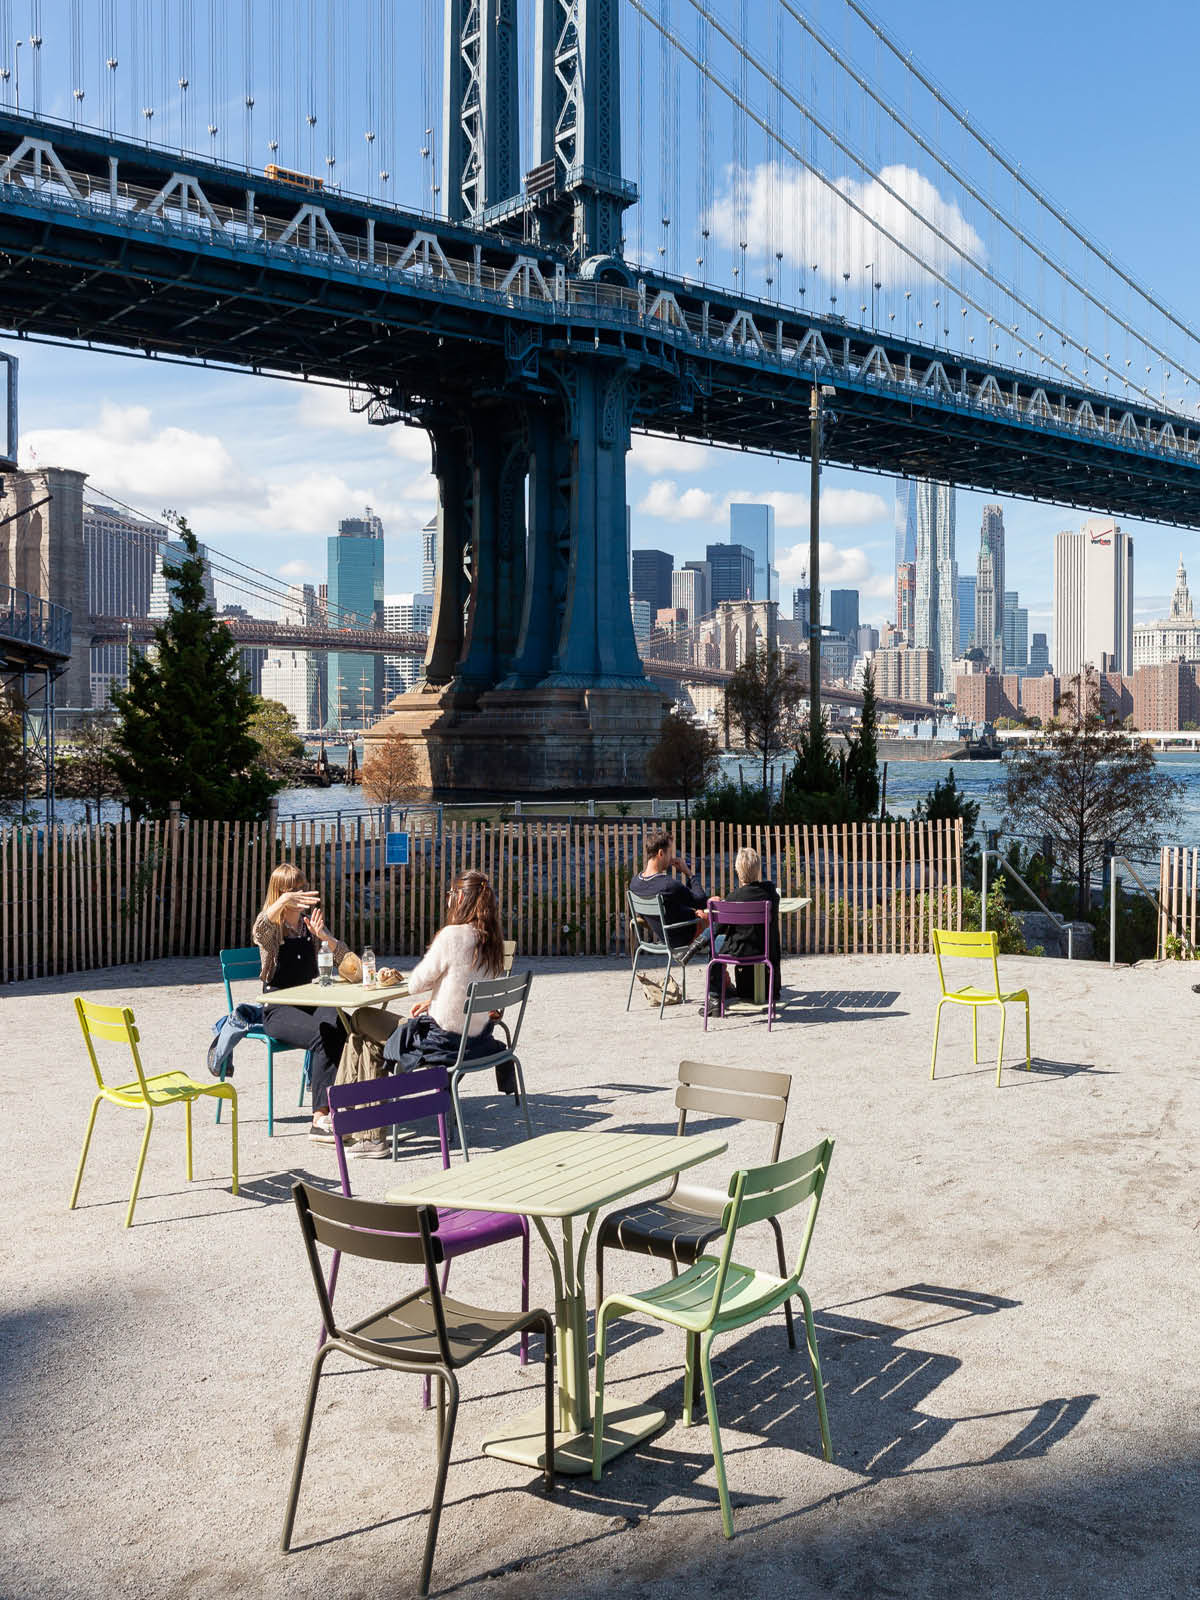 Groups sitting at tables on a terrace on a sunny day. The Manhattan Bridge is seen in the background.